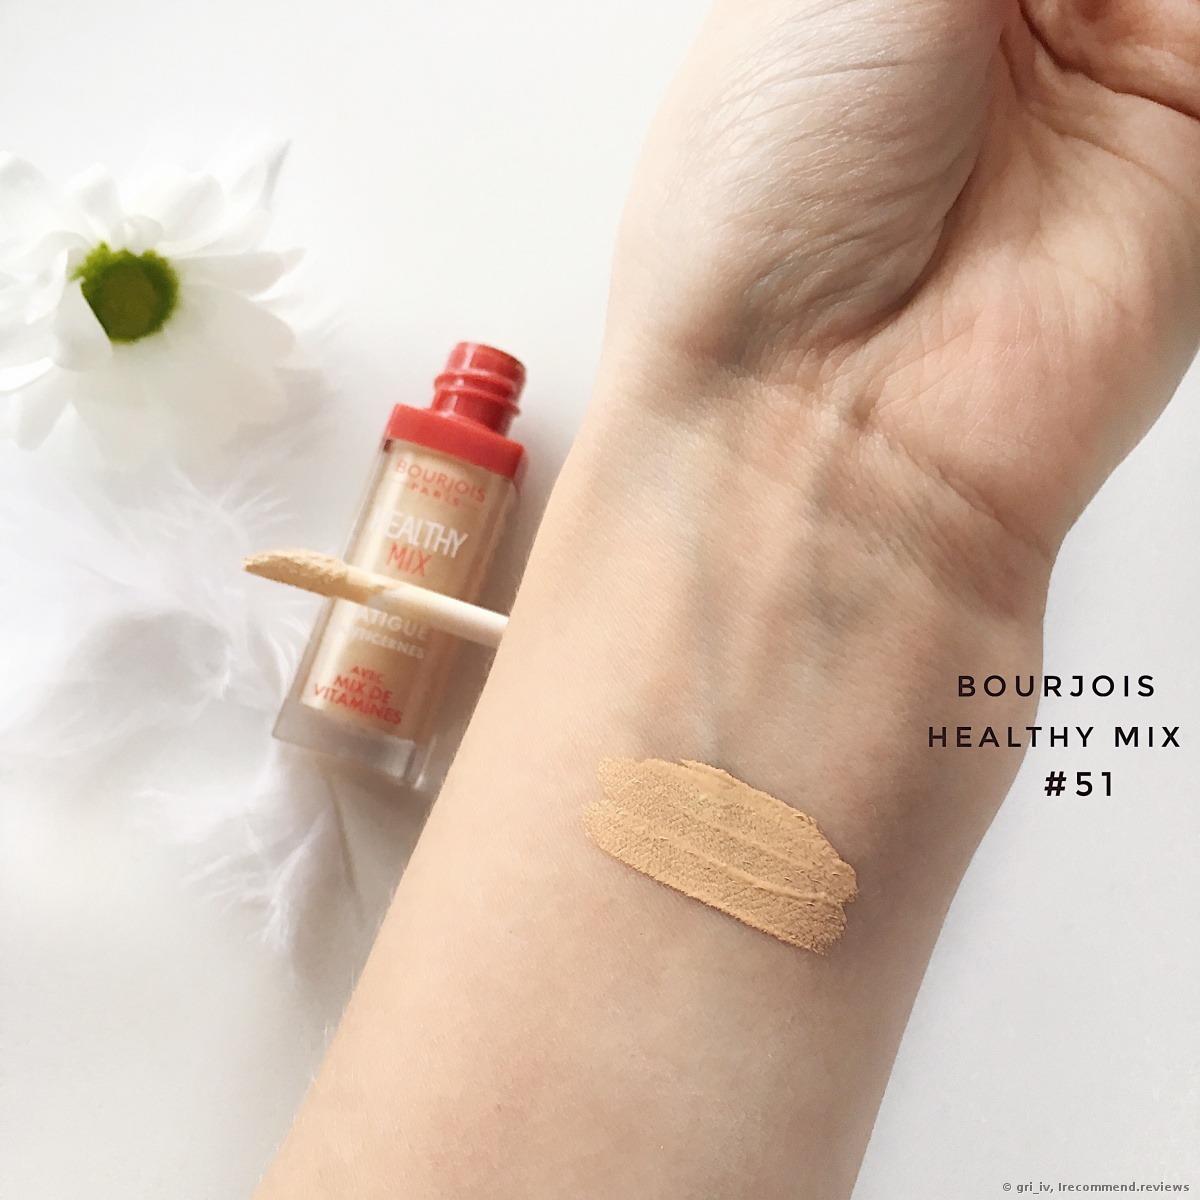 Bourjois Paris Healthy Mix Anti Fatigue Concealer - «Too bad it's not the best concealer I've ever tried. The shade is such a disappointment. Shade: 51. Before and after photos. »